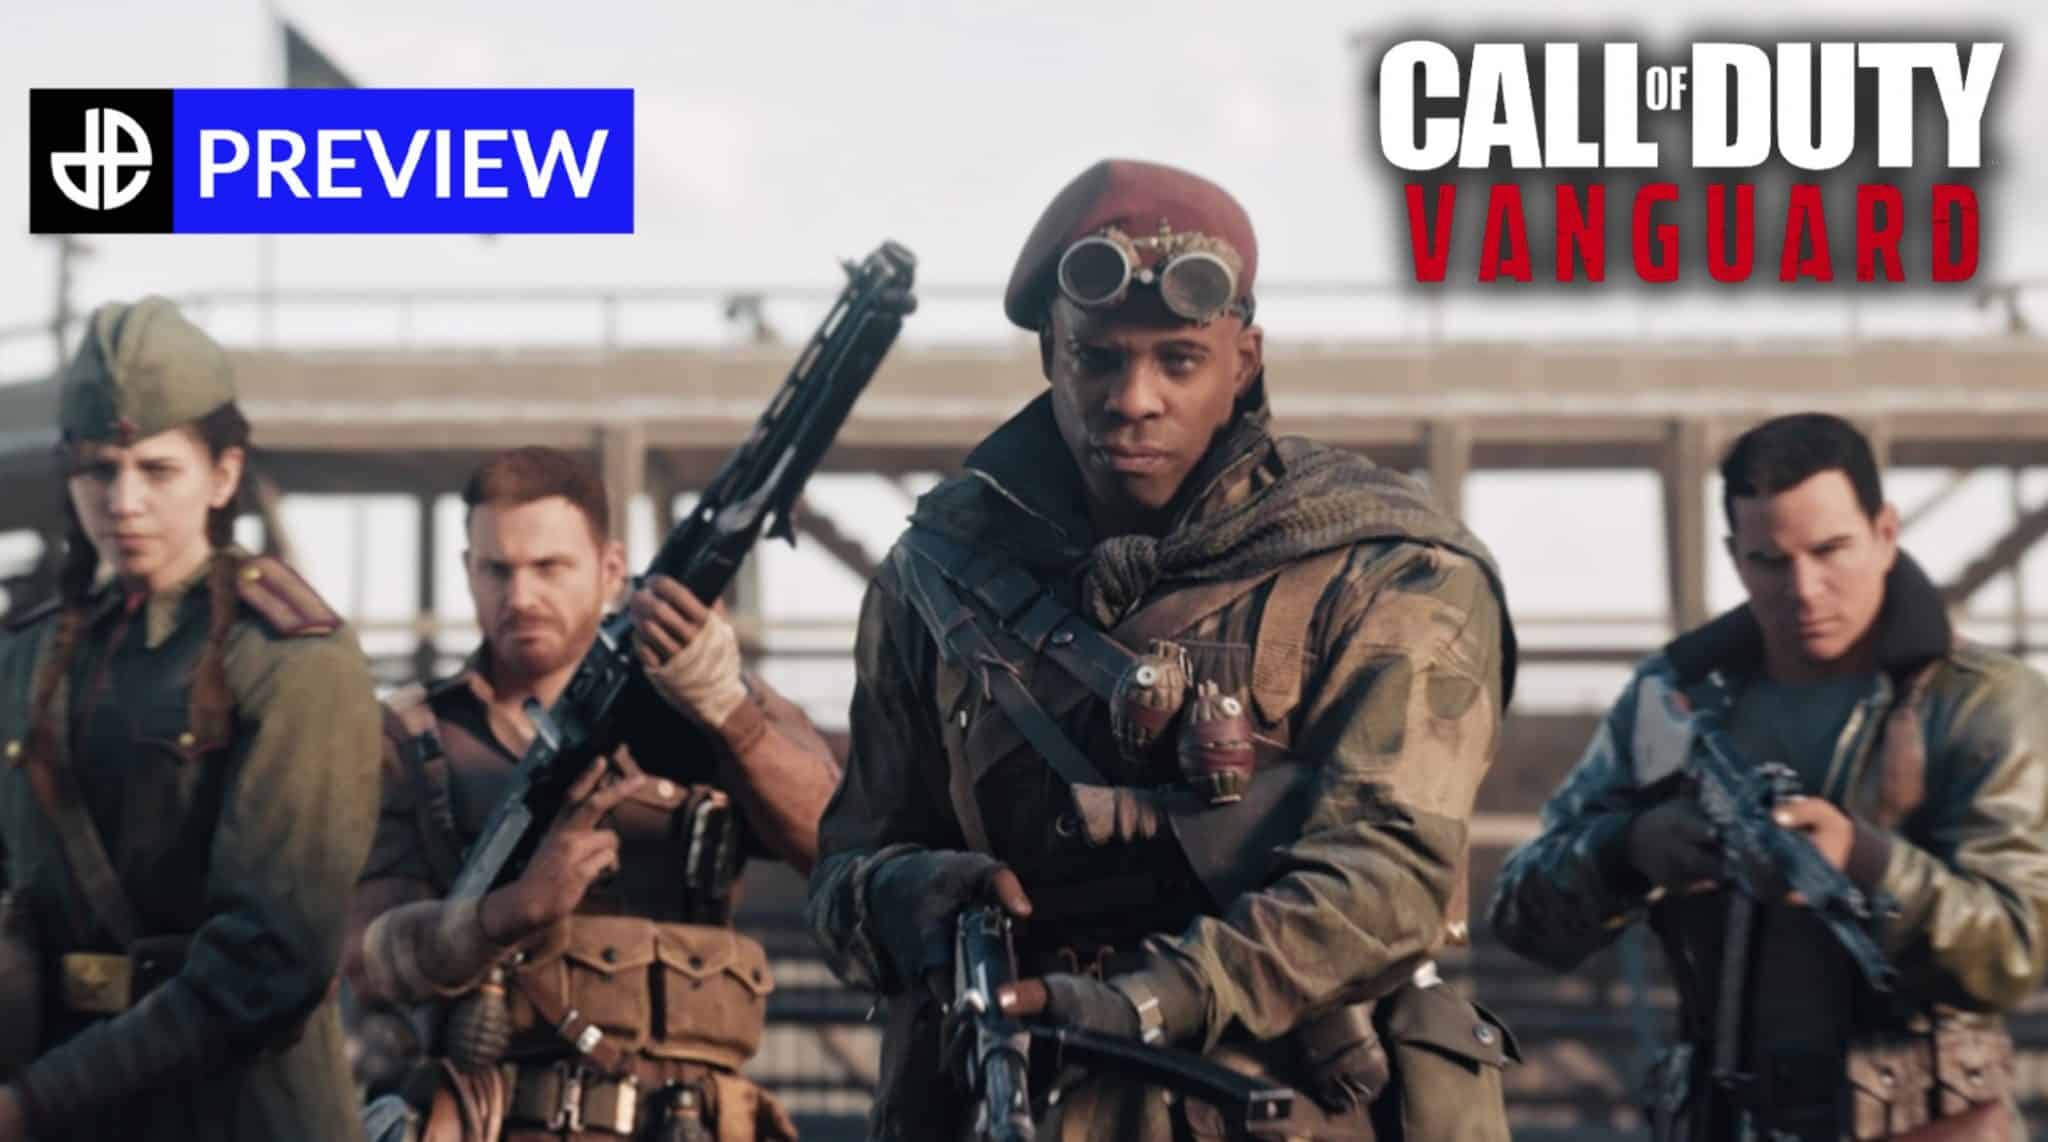 Call of Duty Vanguard Multiplayer Gameplay + Impressions 